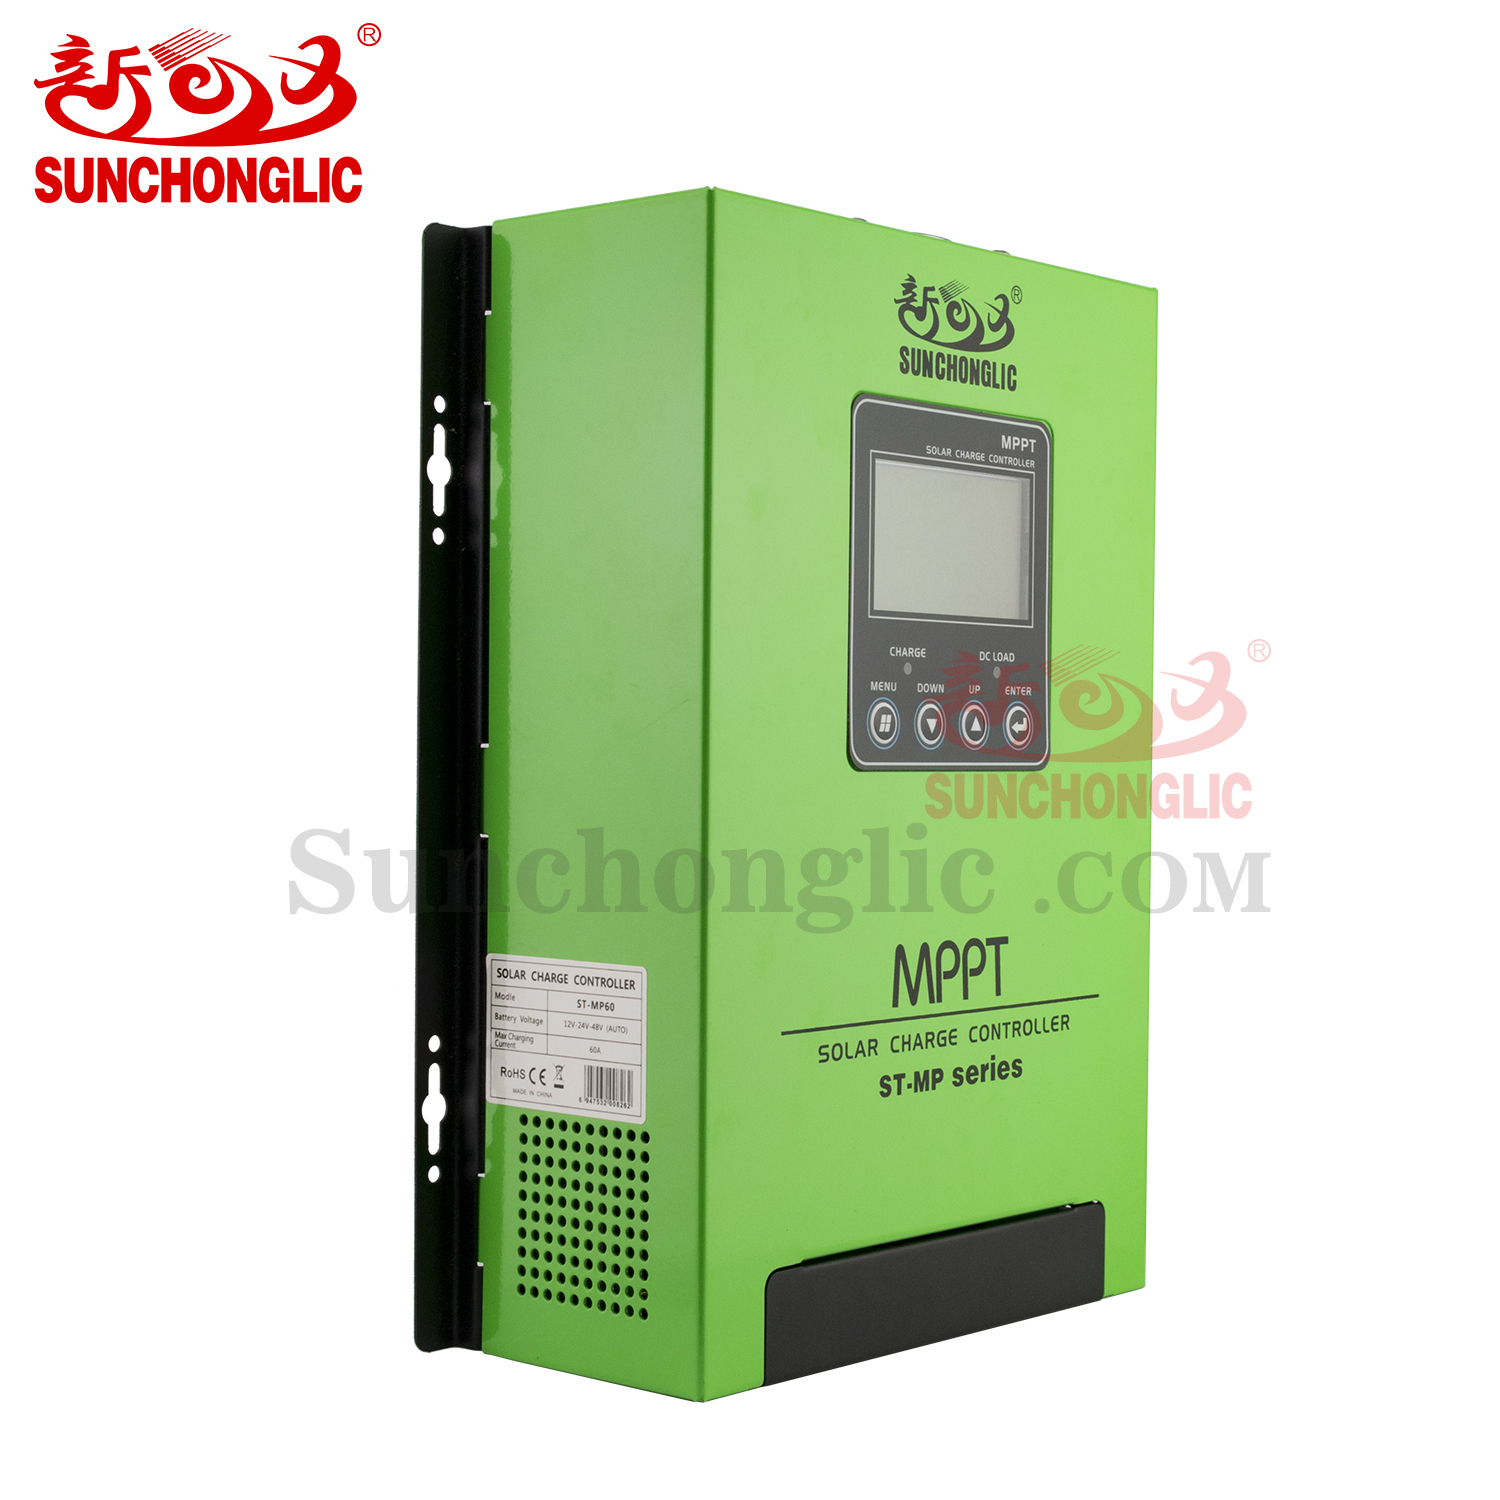 Solar Charge Controller - FT-MP-60A